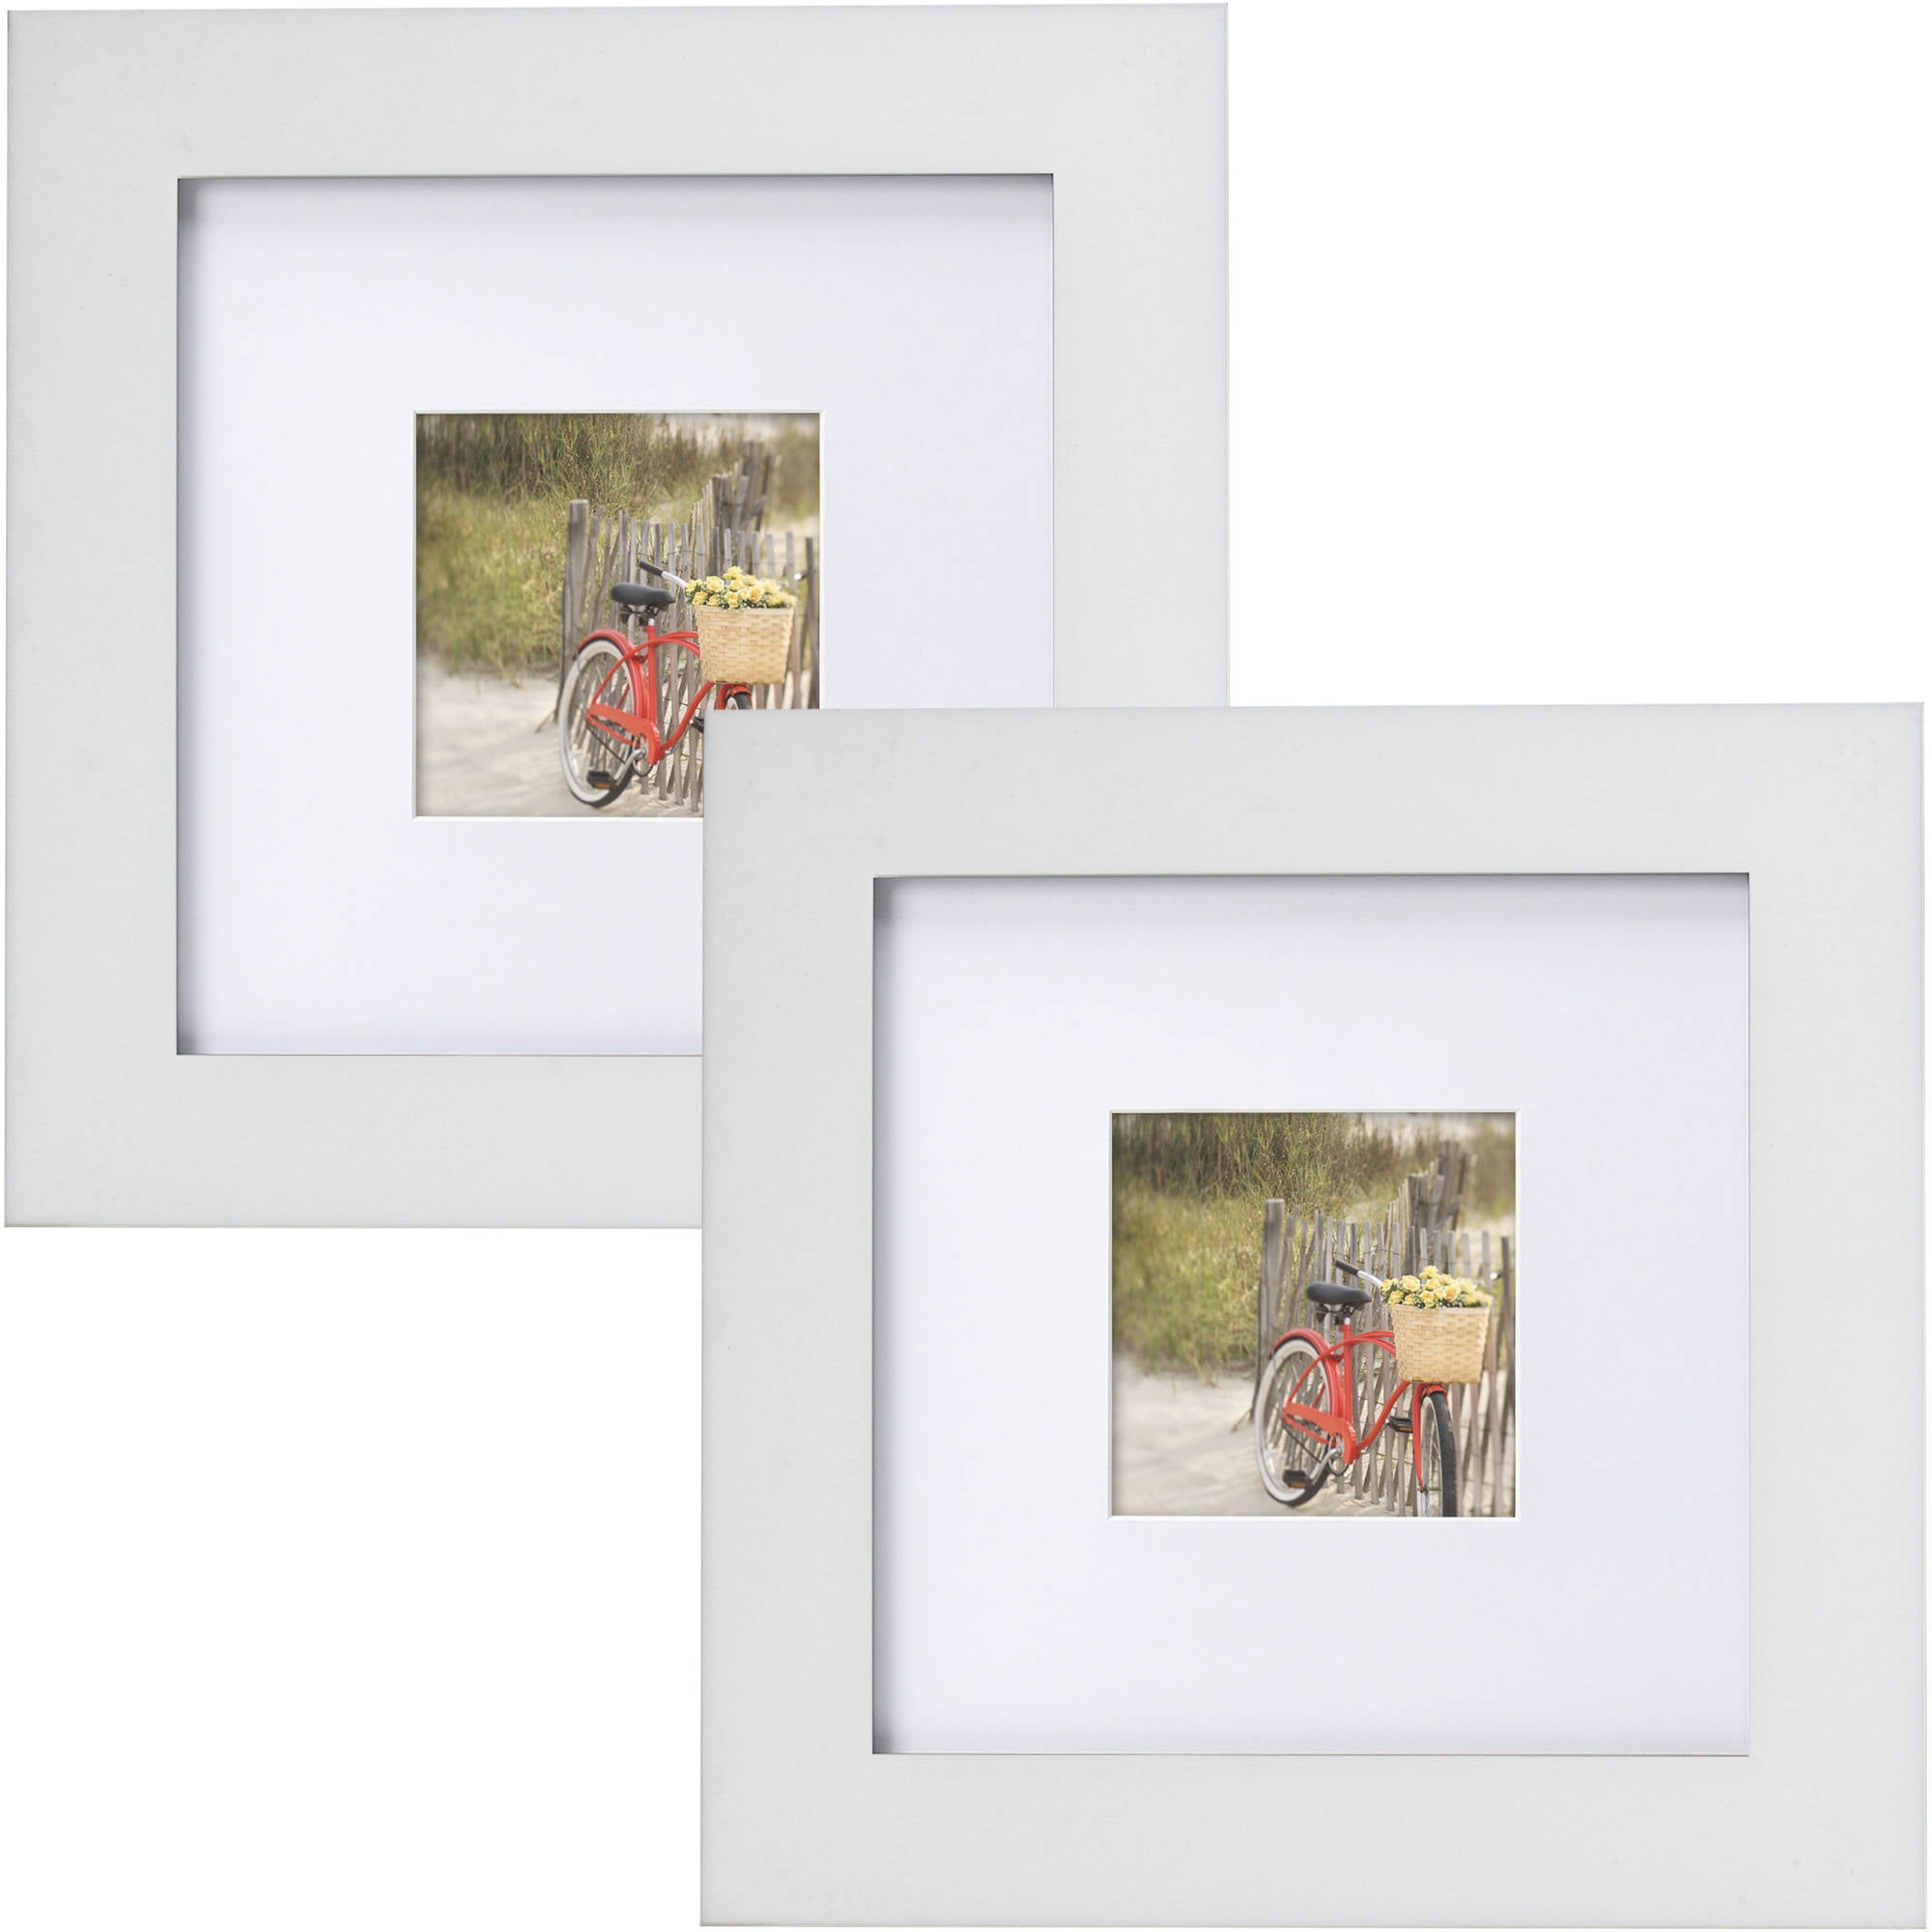 Mainstays Museum 8 x 8 Matted to 4 x 4 Picture Frame, White, Set of 2